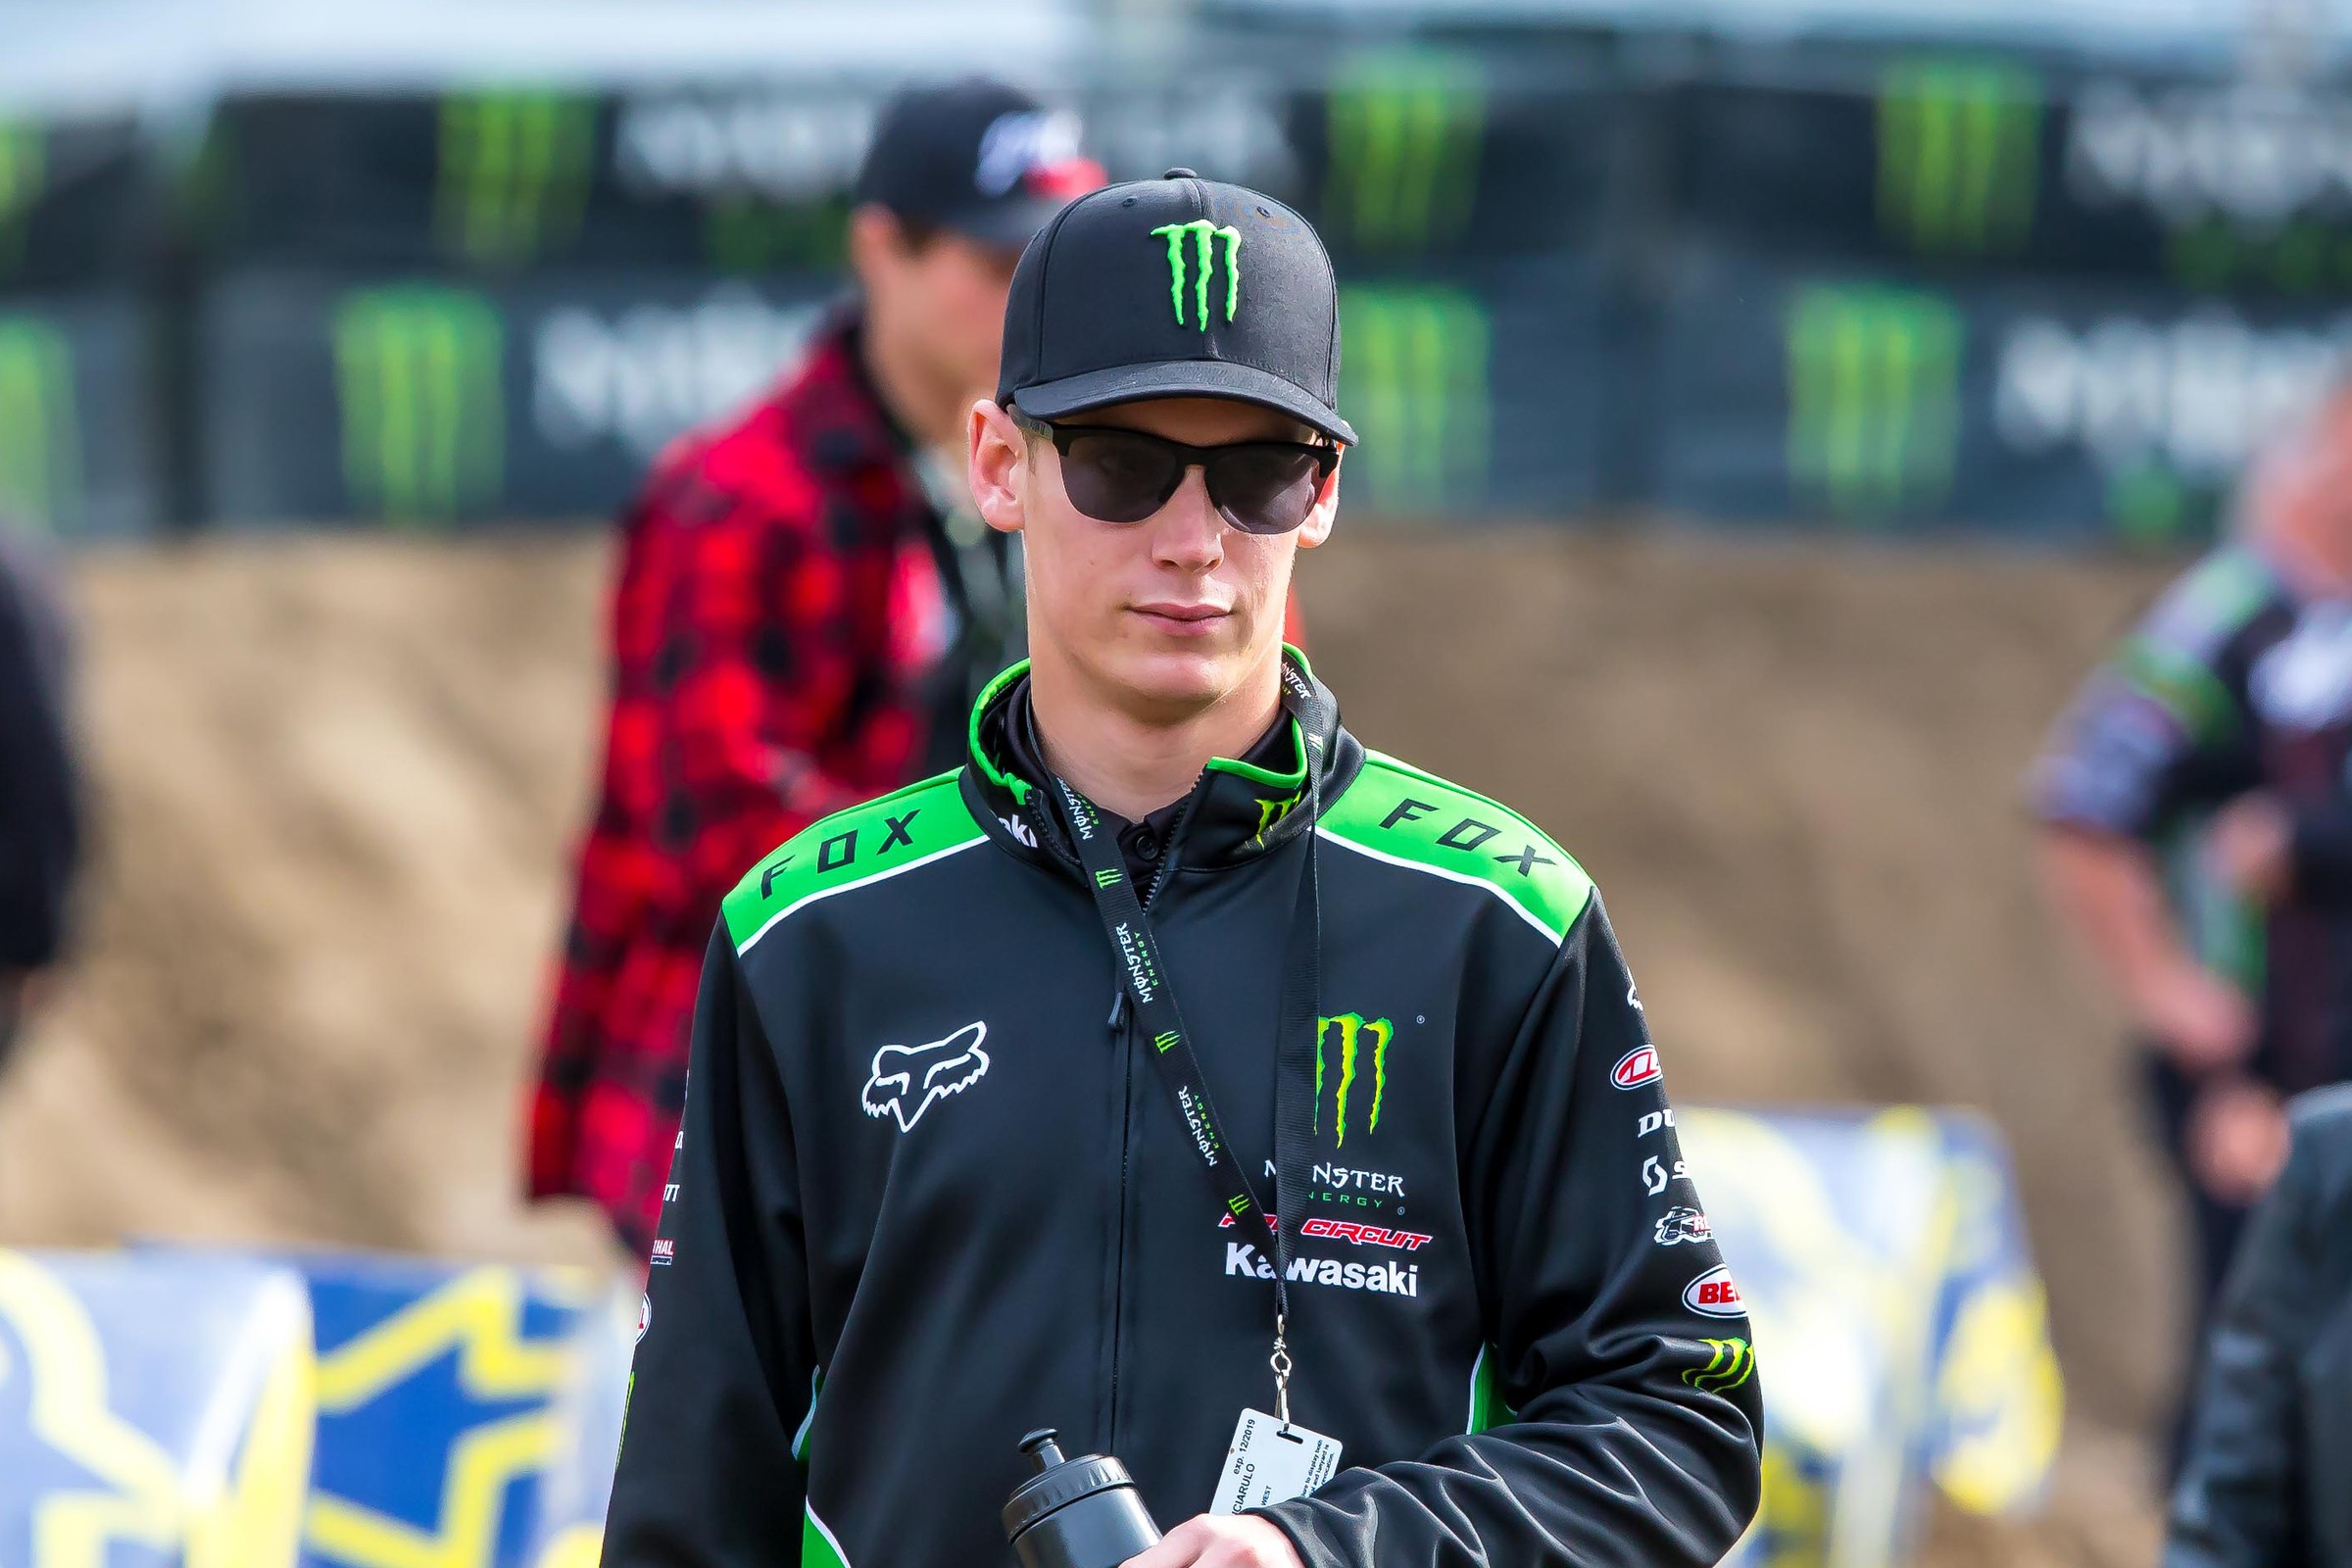 10 Things to Watch at 2019 Denver SX Supercross Racer X